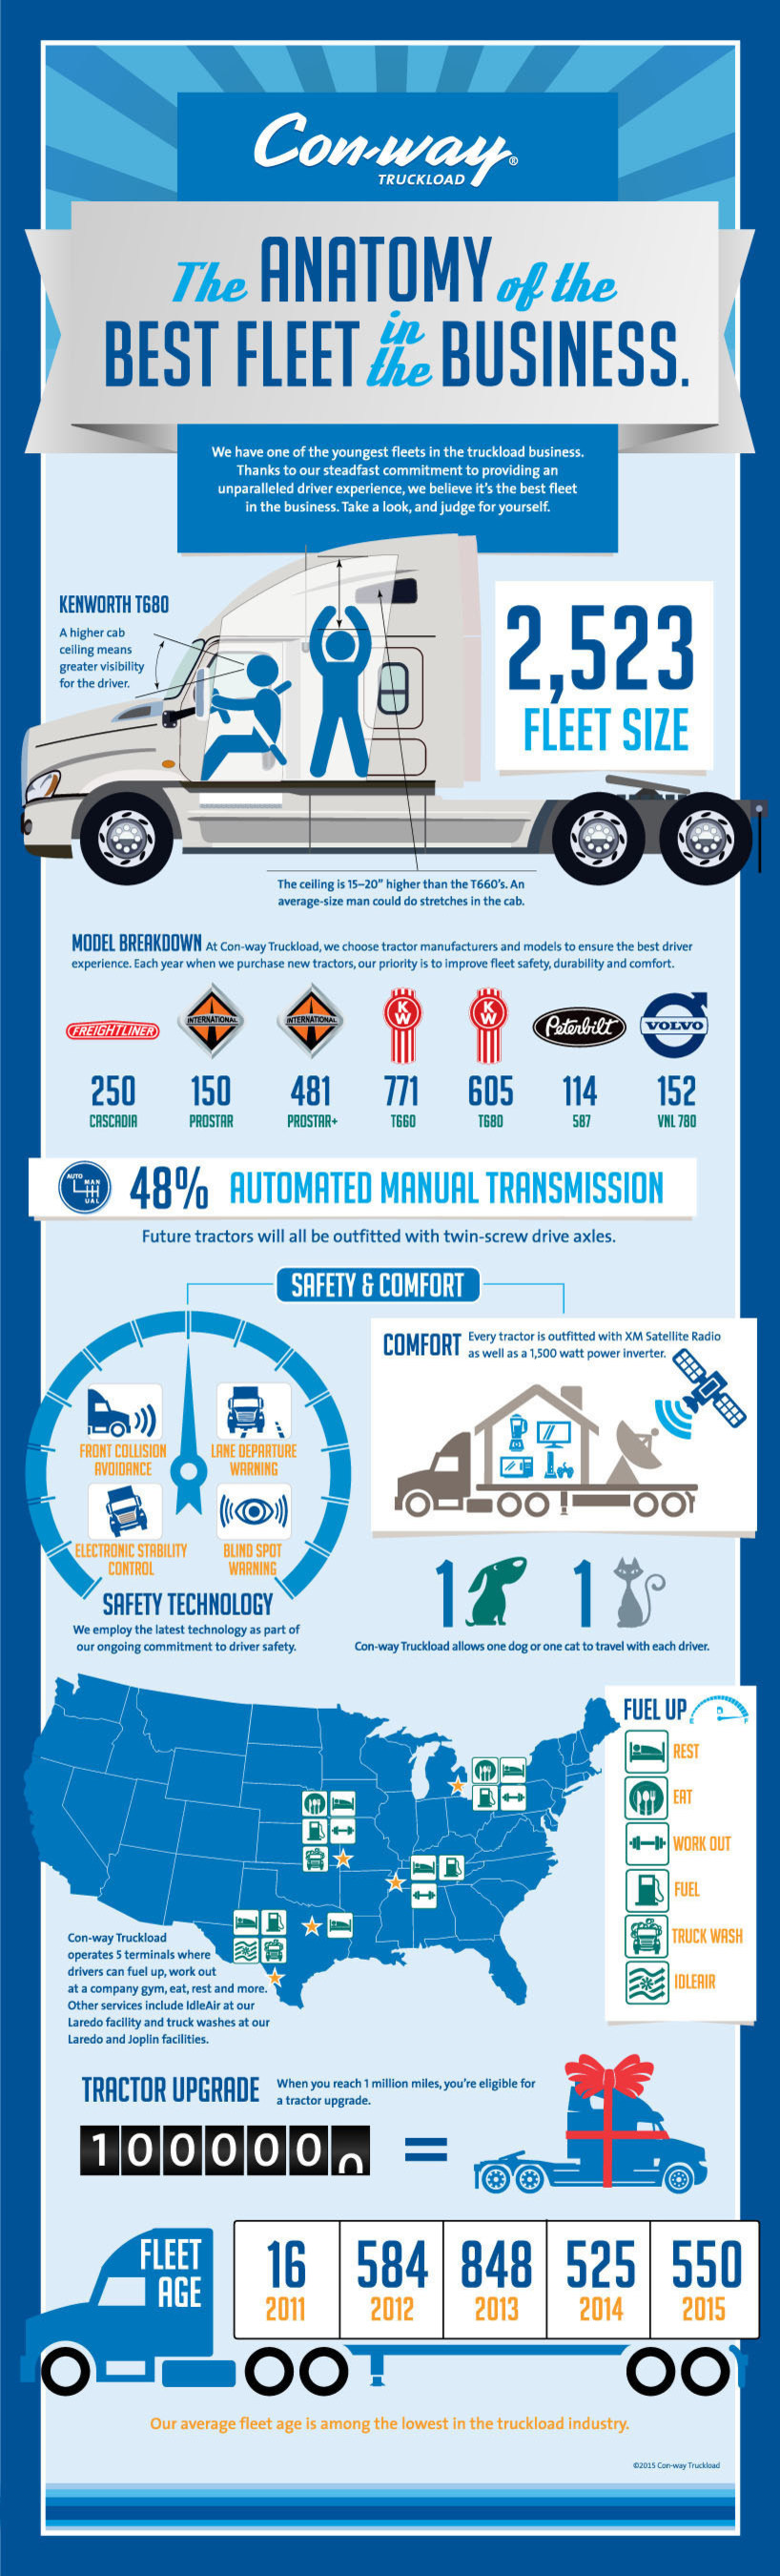 Con-way Truckload Invests in 635 New Tractors, All with Automated Manual Transmissions and Twin Screw Axles